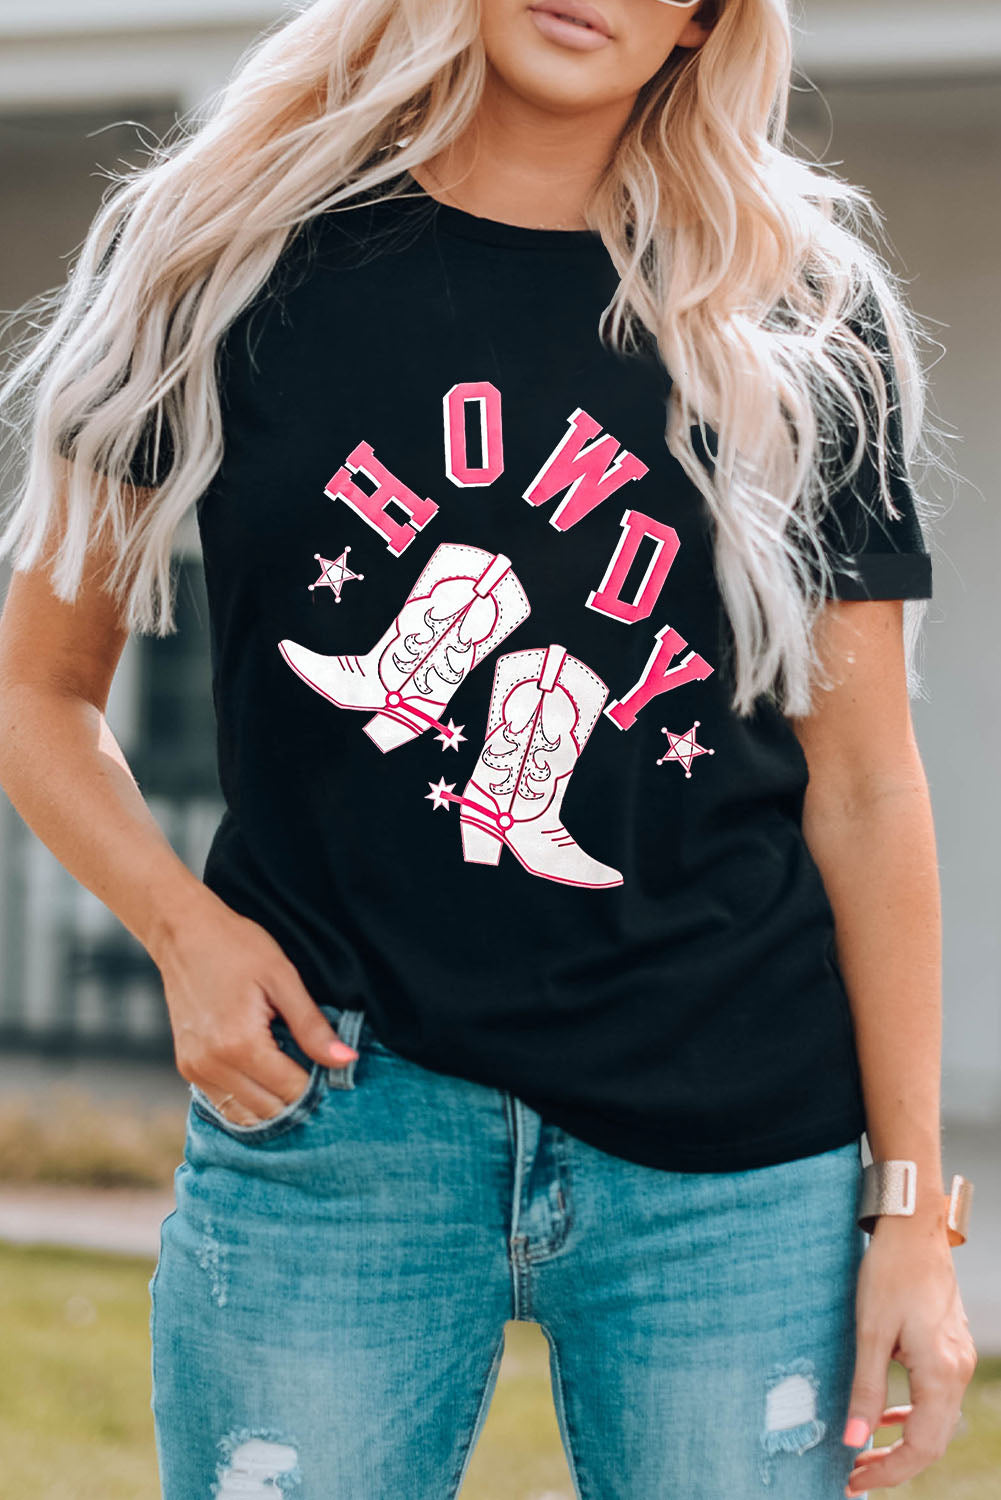 HOWDY Cowboy Boots Graphic Tee free shipping -Oh Em Gee Boutique